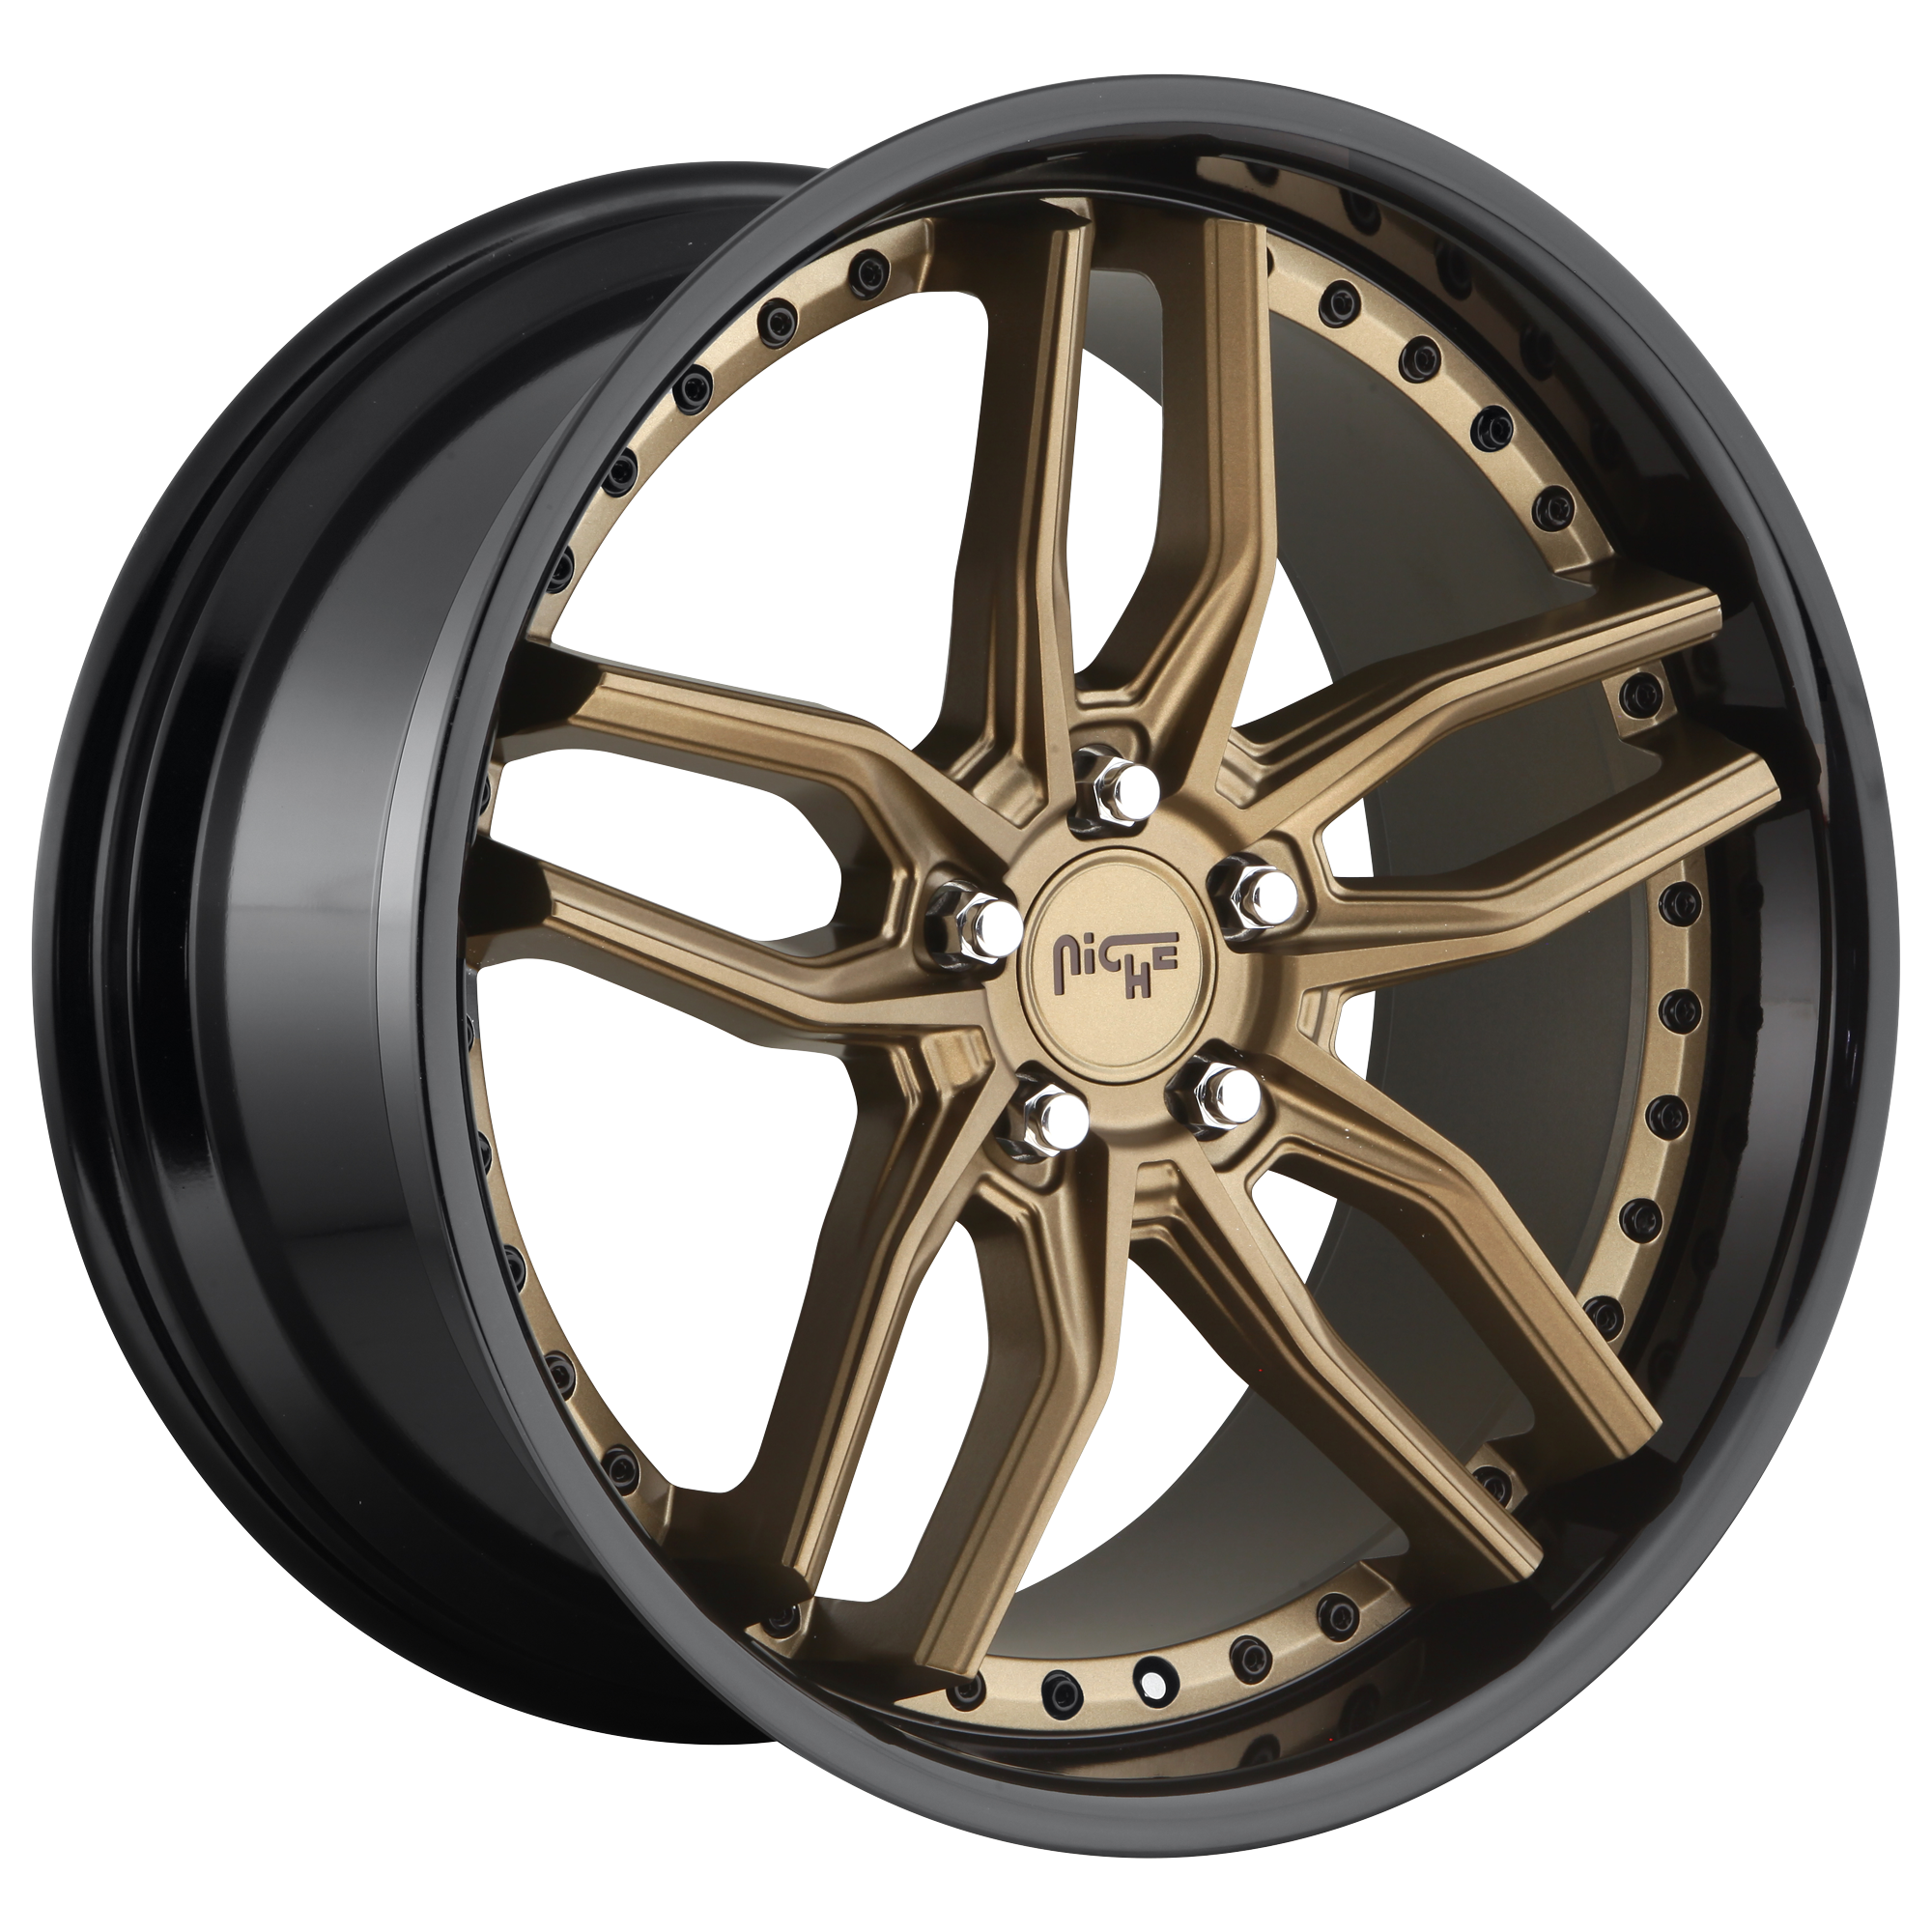 METHOS 20x9 5x114.30 MATTE BRONZE BLACK BEAD RING (35 mm) - Tires and Engine Performance